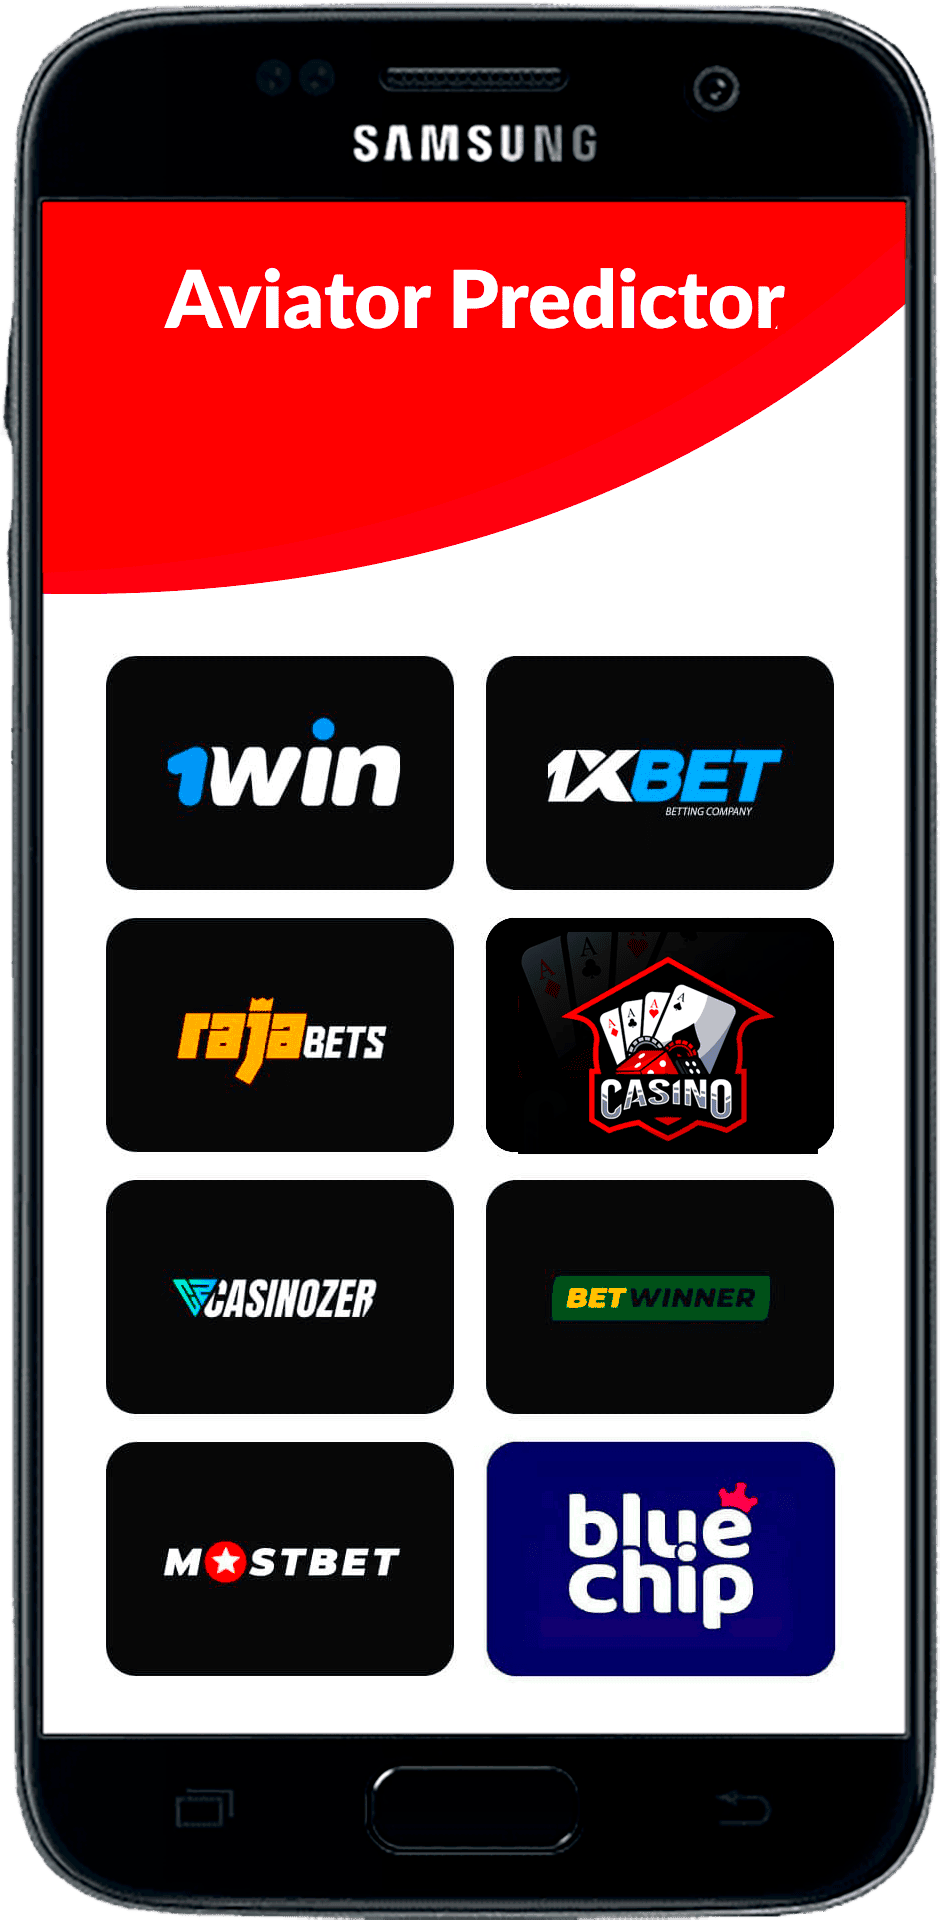 Welcome to a New Look Of Top 5 Betting Apps With Free Bets in India